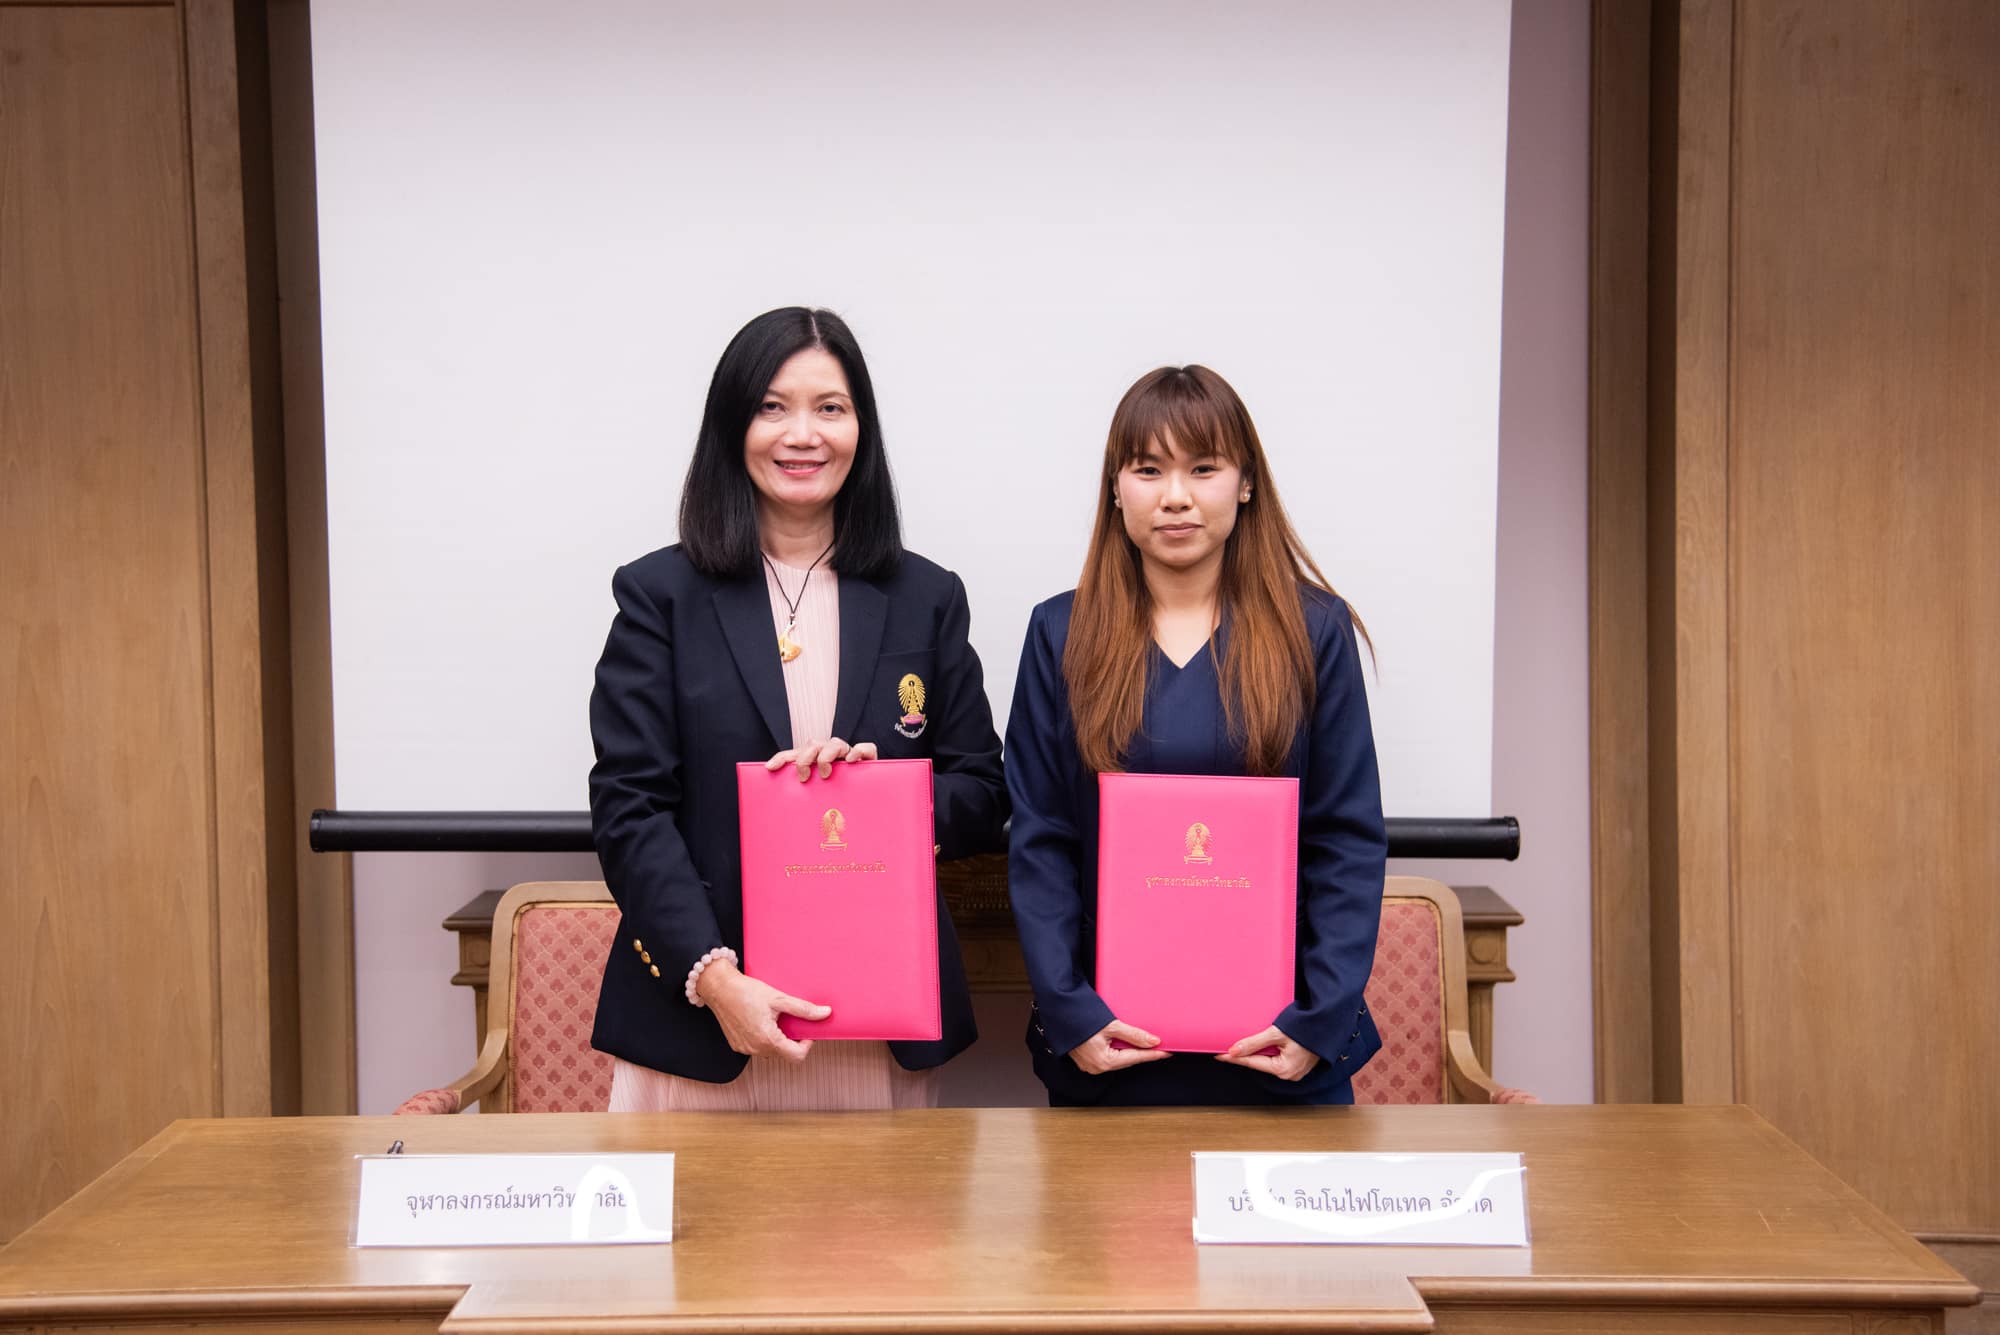 Chulalongkorn University’s Vice President for Strategic Planning, Innovation and Global Engagement Prof. Dr. Kaywalee Chatdarong and CEO of Innophytotech Co., Ltd. Ms. Kedtida Cheevarungnapakul, signed an agreement to gain rights under the petty patent owned by Chulalongkorn University.